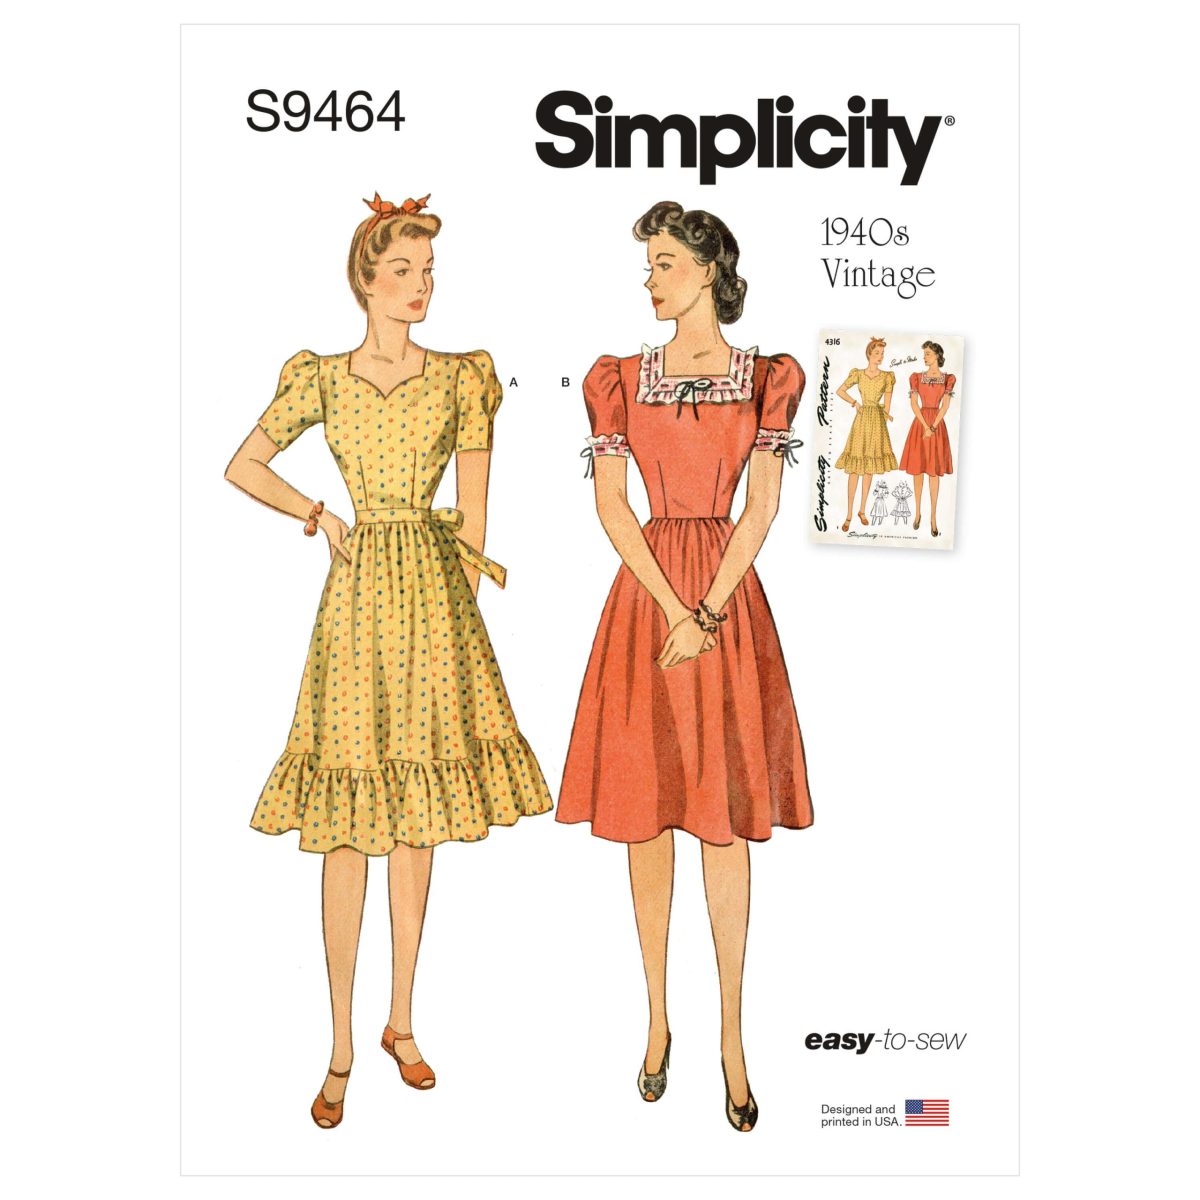 Simplicity Sewing Pattern S9464 Misses' 1940s Vintage Dress - Sewdirect